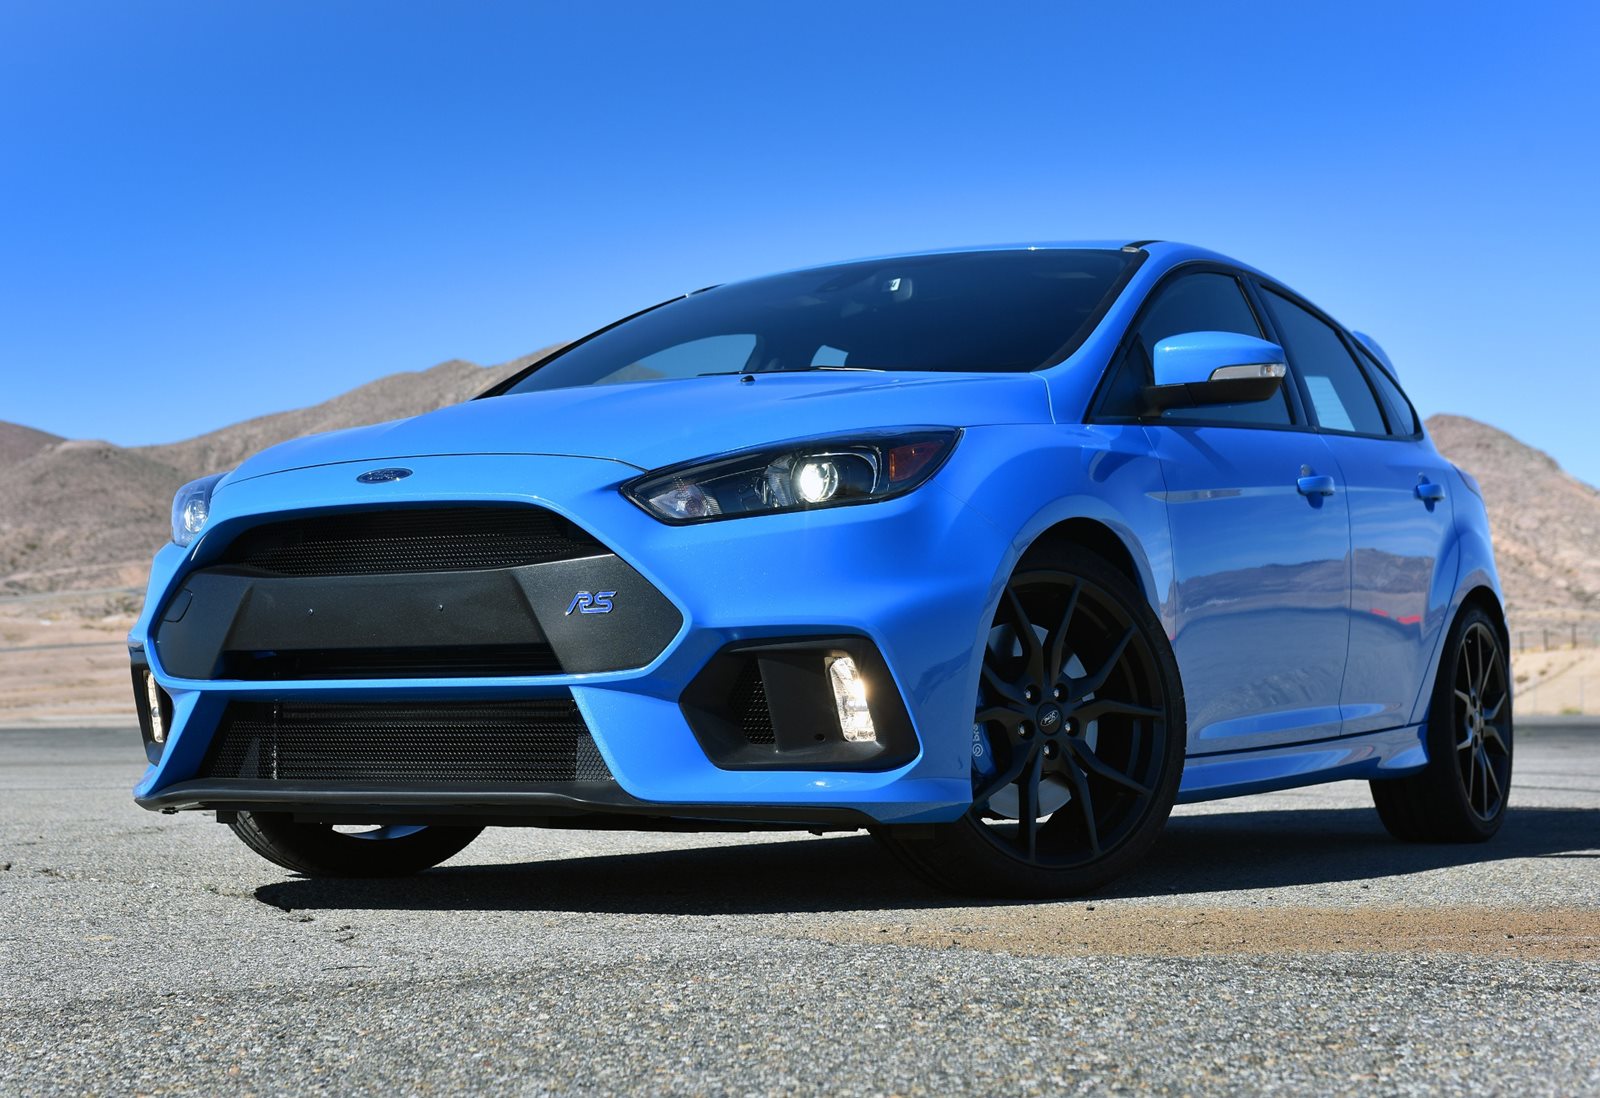 Used Ford Focus RS AWD for sale: buy All Wheel Drive Hatchback with